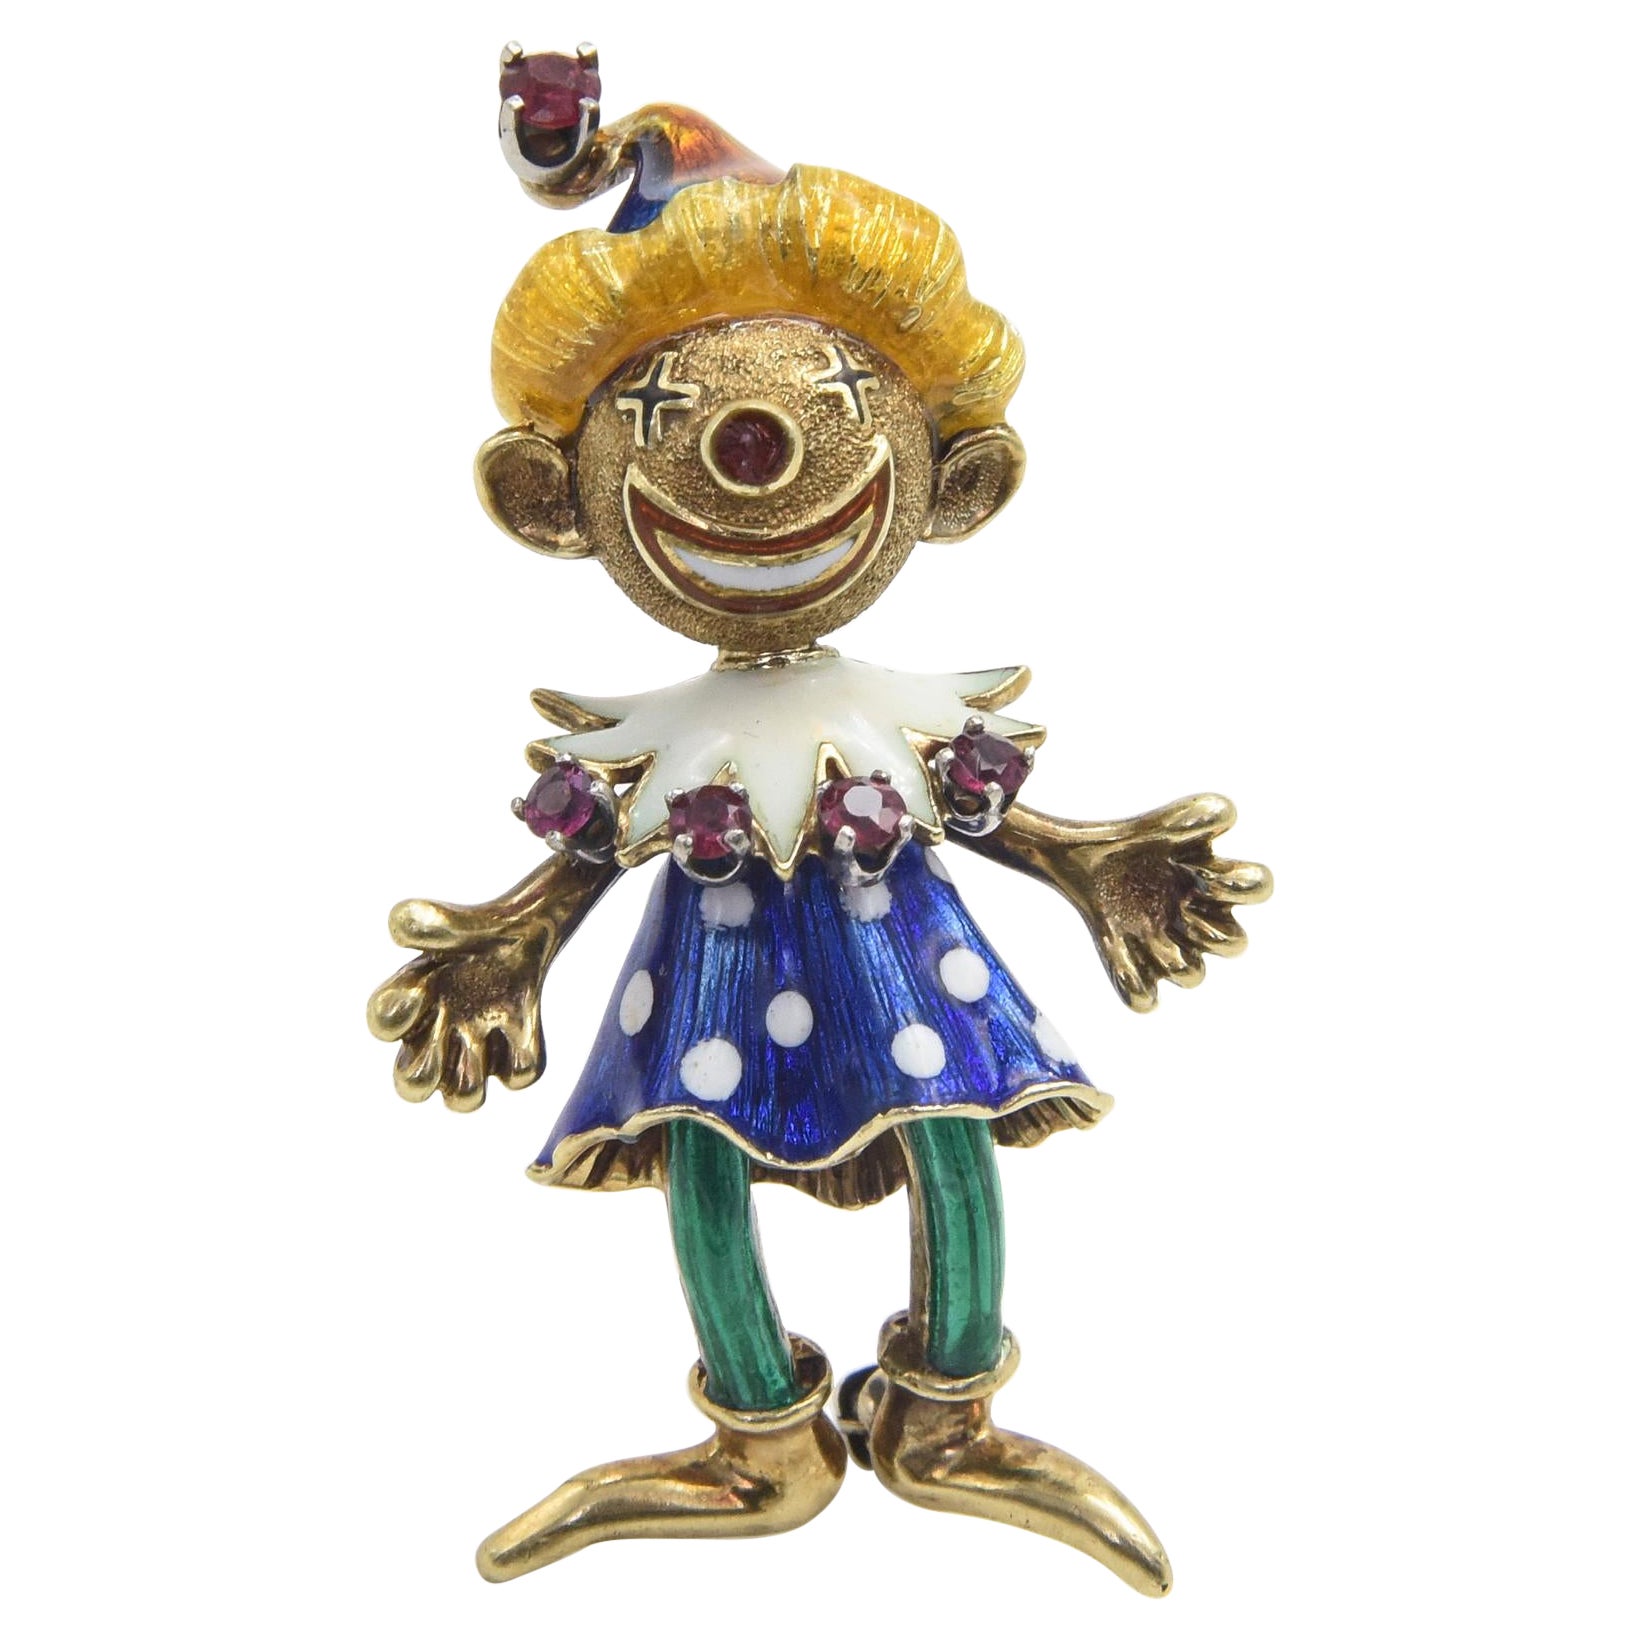 Martine Articulated Enamel Smiling Clown Girl Ruby Yellow Gold Brooch